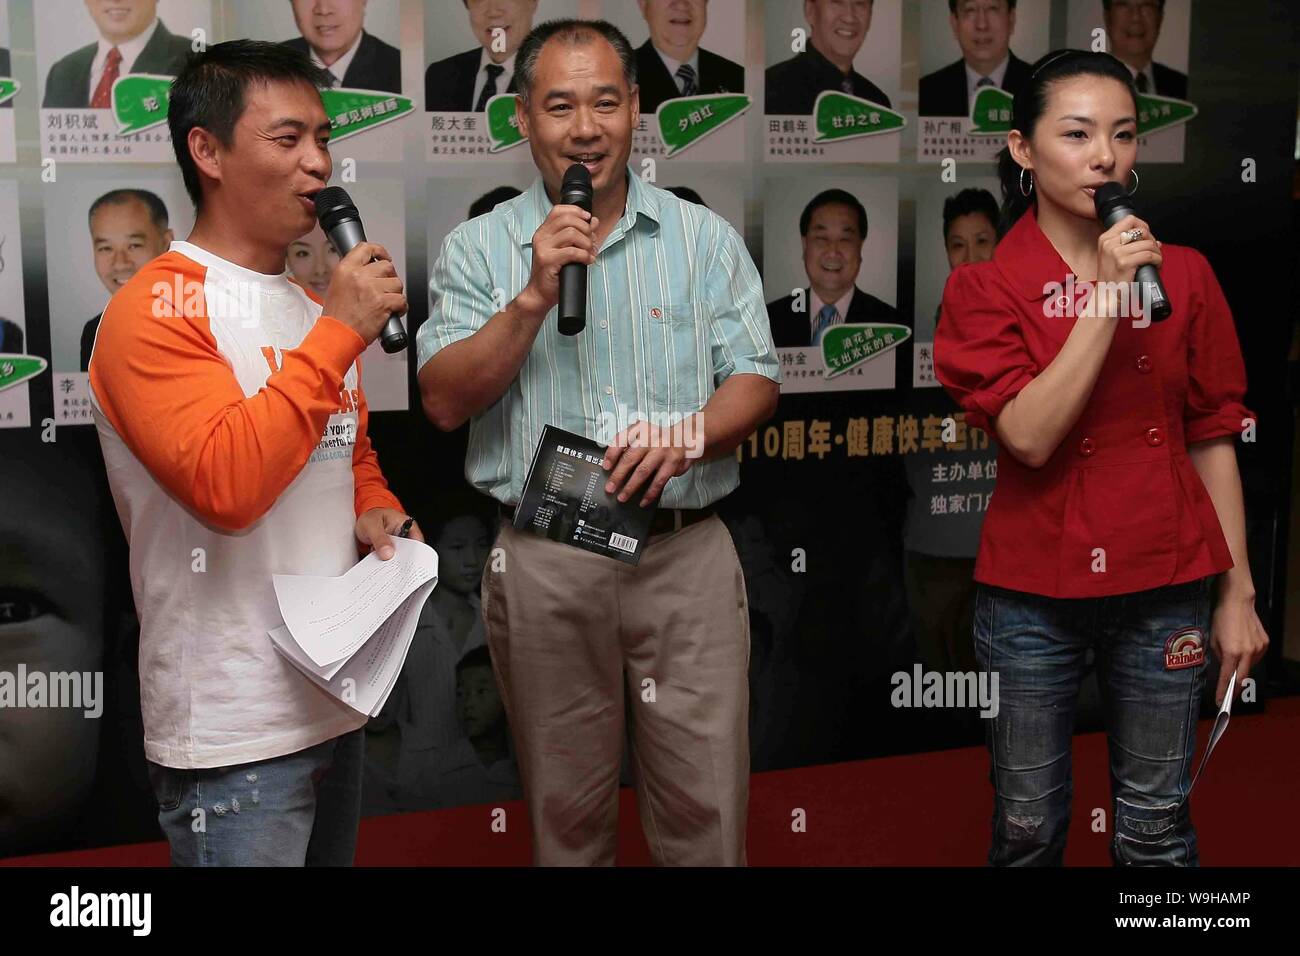 Chinese Olympic gymnastics gold medal winners Liu Xuan, right, Li Ning, center, and Li Xiaoshuang at a commonweal event to collect money for the poor Stock Photo